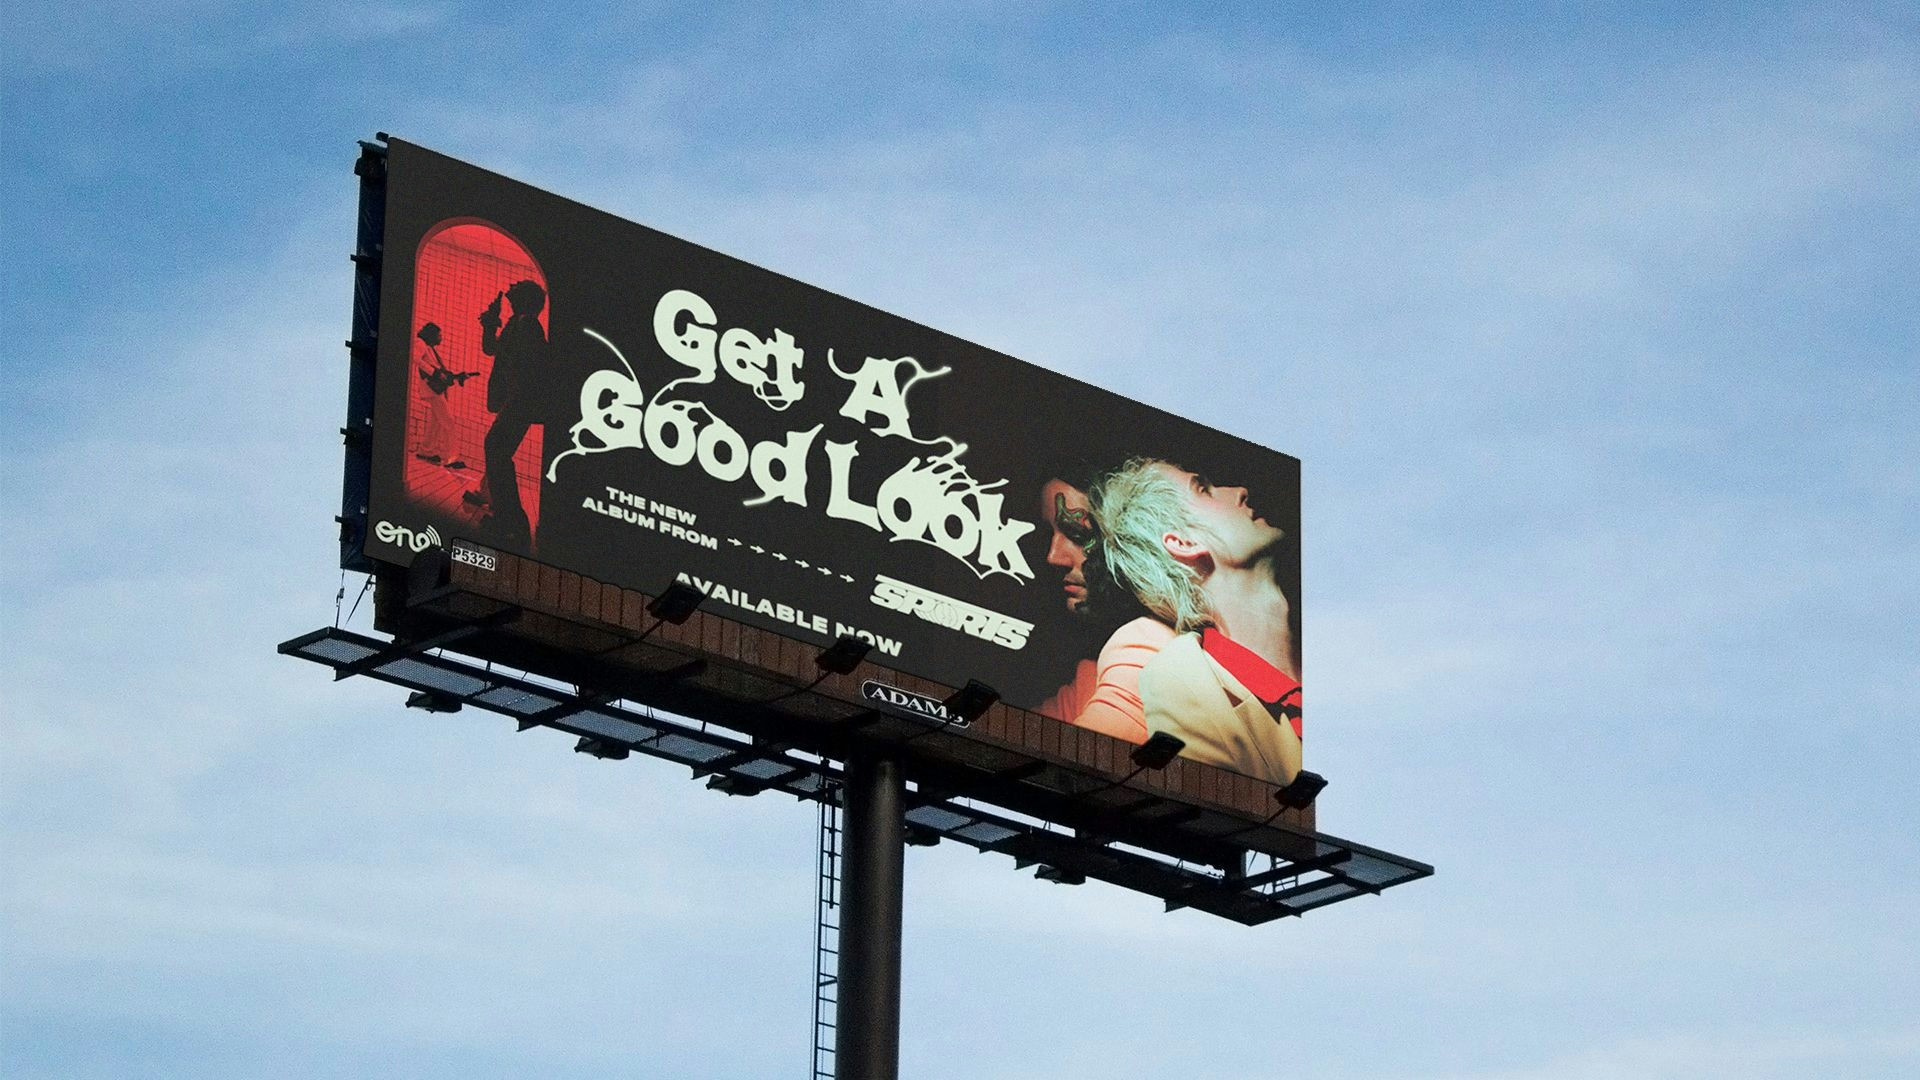 From the Sports Get A Good Look Album Campaign is a billboard that reads: "Get a good look"